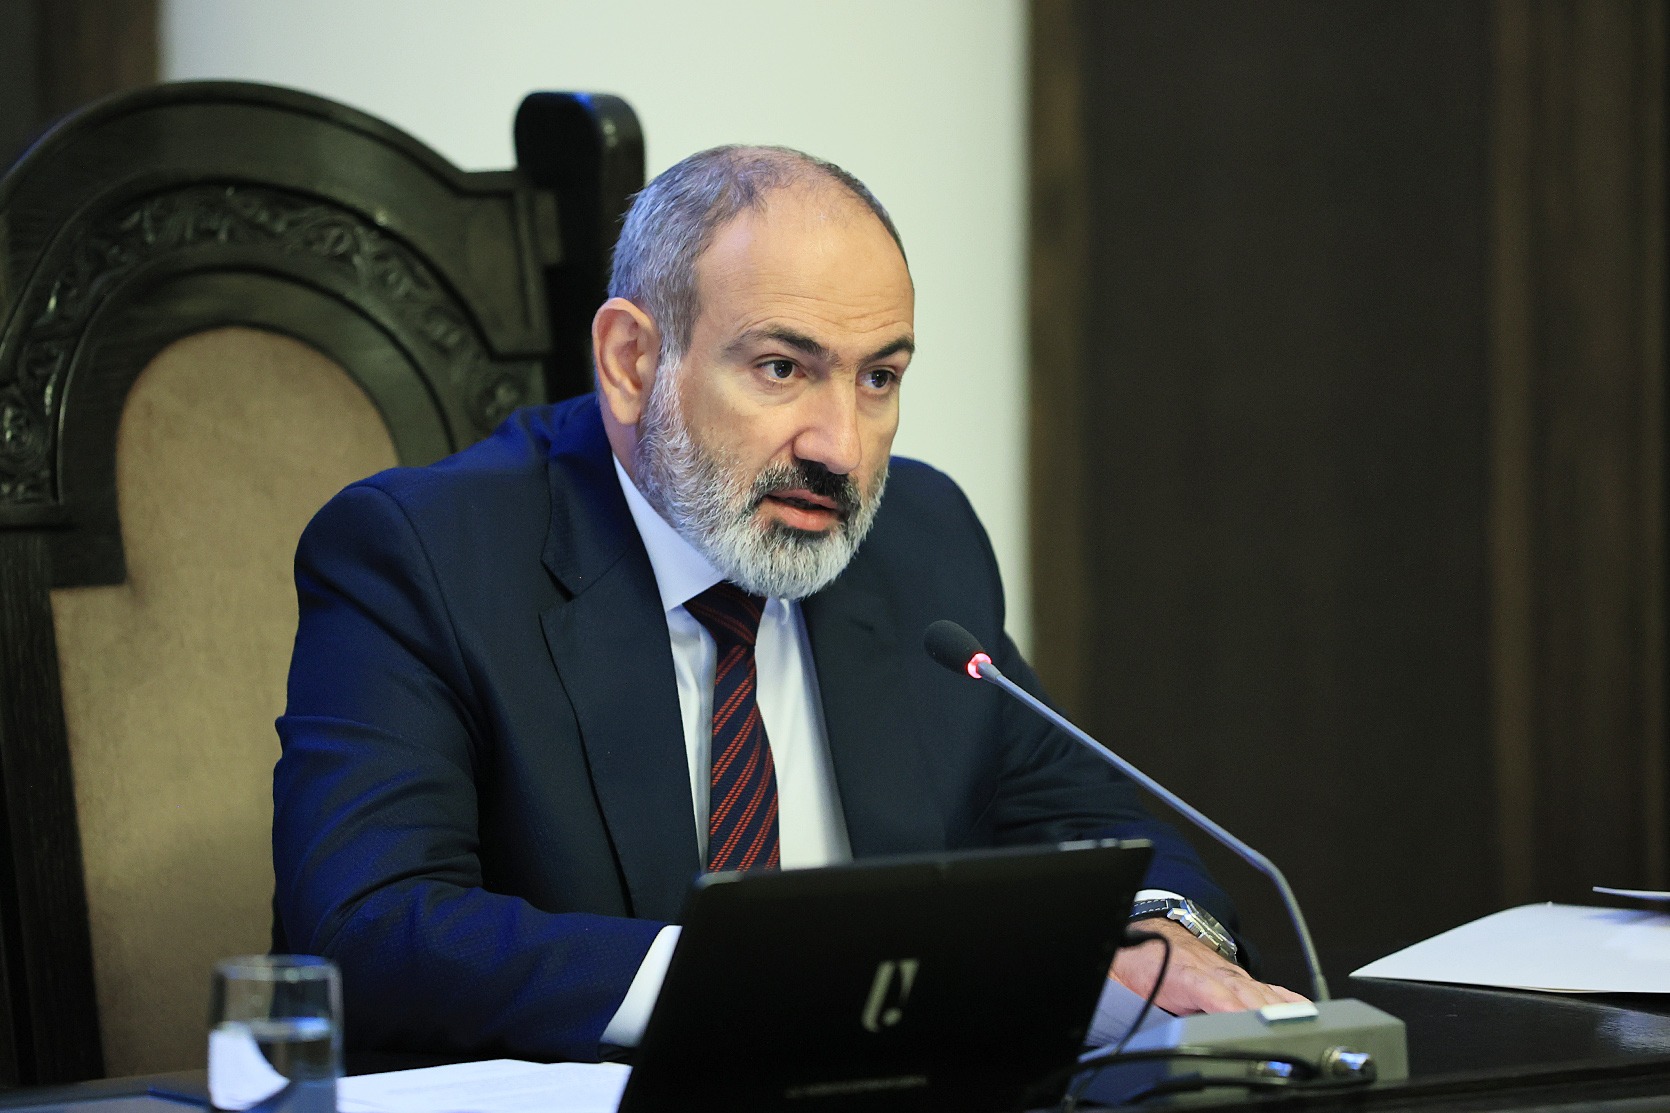 Nikol Pashinyan: ‘We hope Azerbaijan will cooperate in clarifying the destiny of our compatriots’